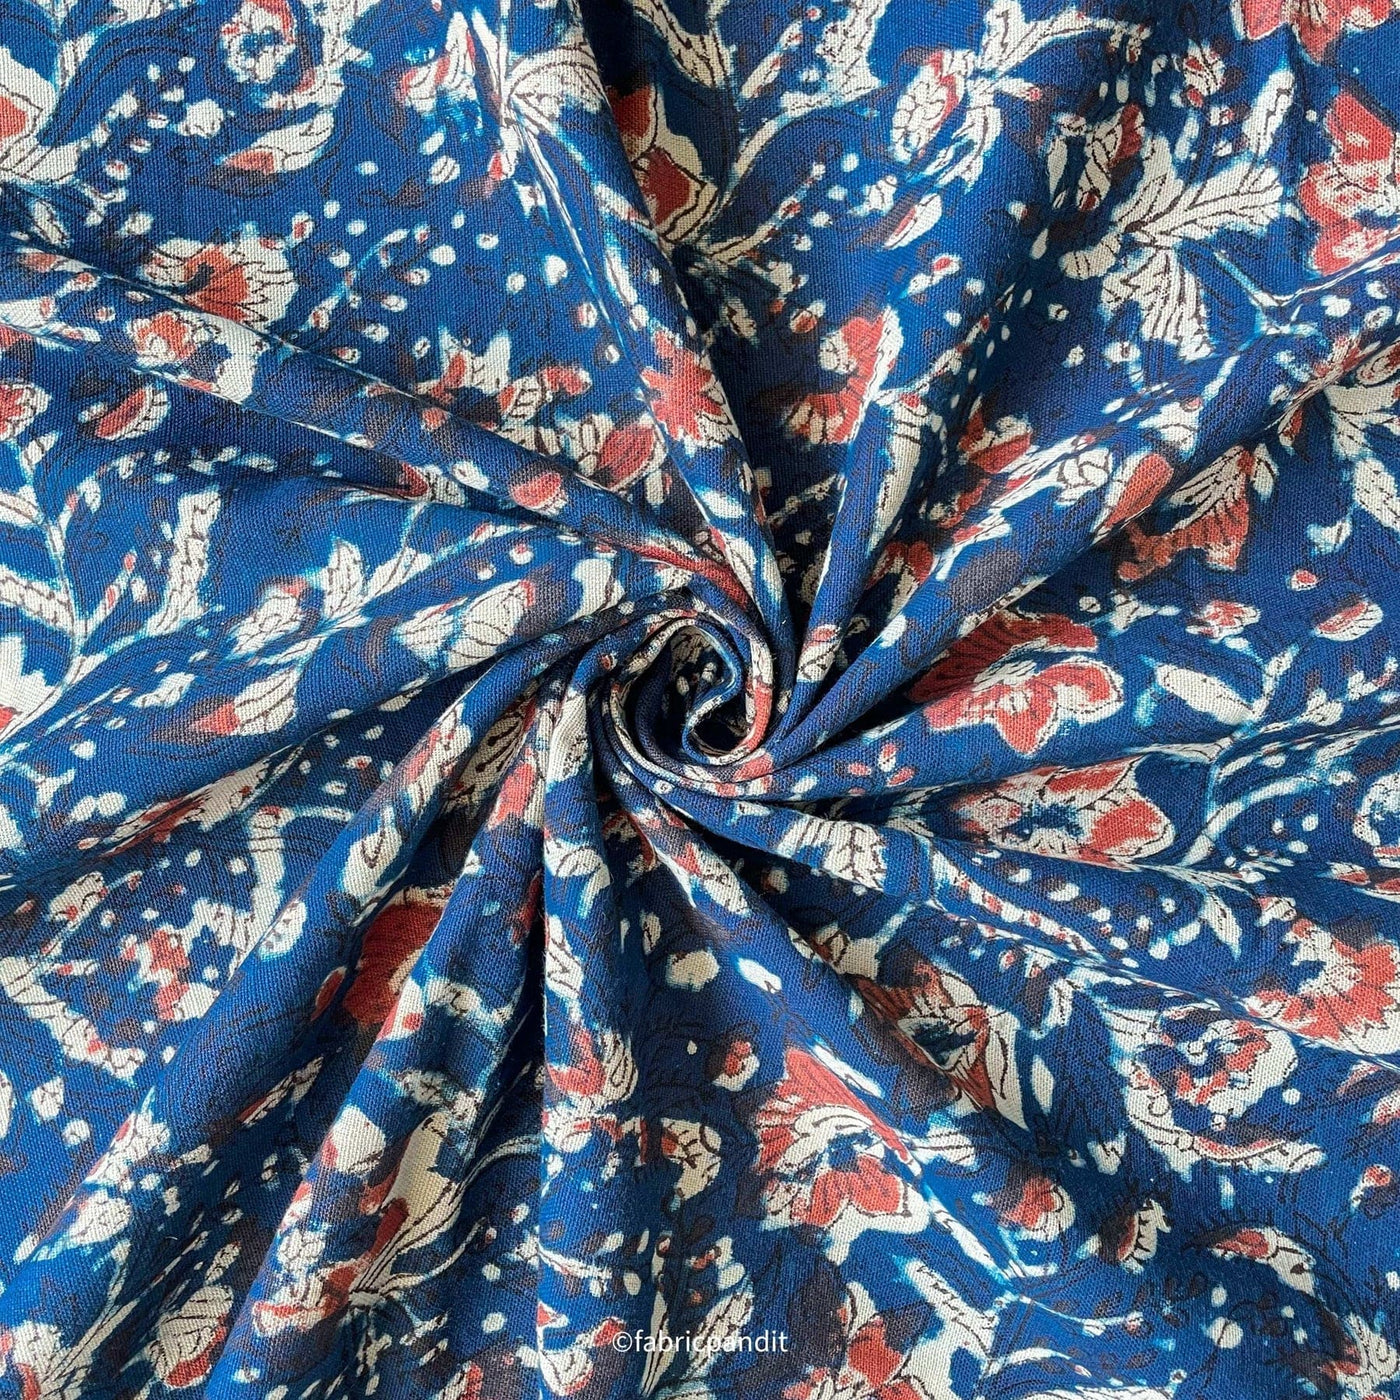 Fabric Pandit Fabric Indigo Blue & Red Egyptian Floral Garden Hand Block Printed Pure Cotton Linen Fabric (Width 42 inches)